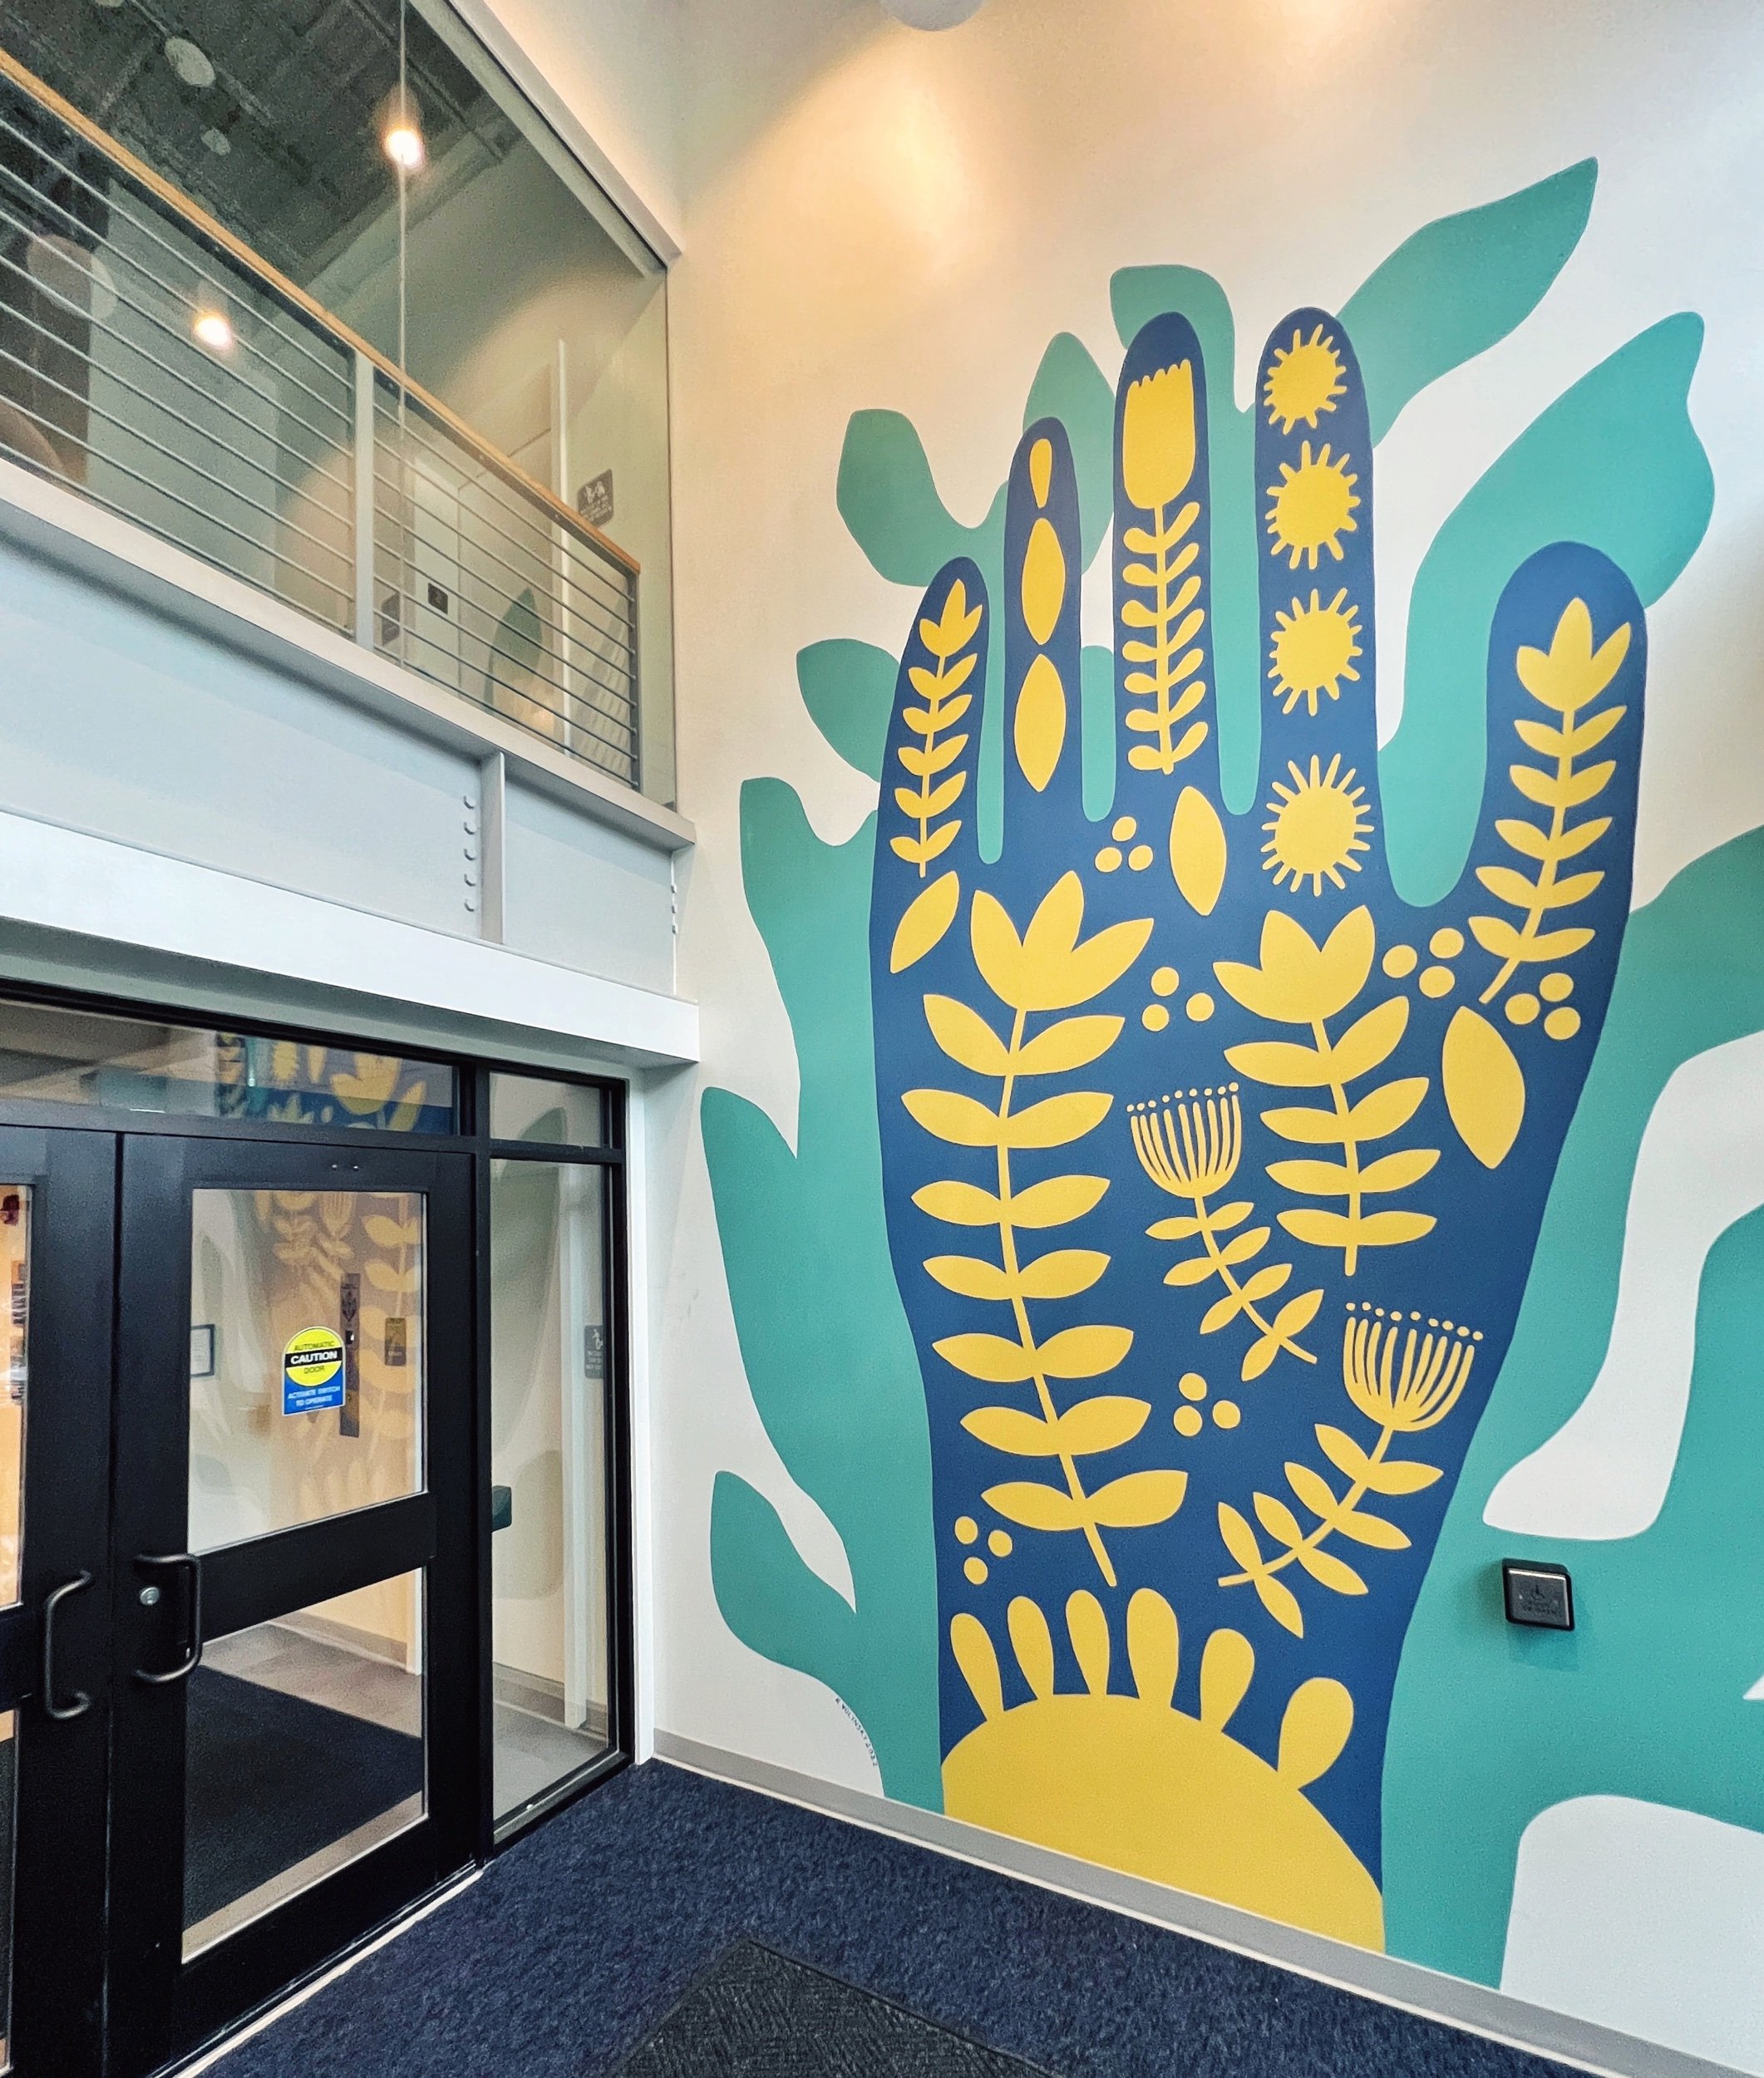  Commissioned mural for the Preble Street administrative building and Healing Center in Portland, Maine. This piece was designed and painted in June 2022. 